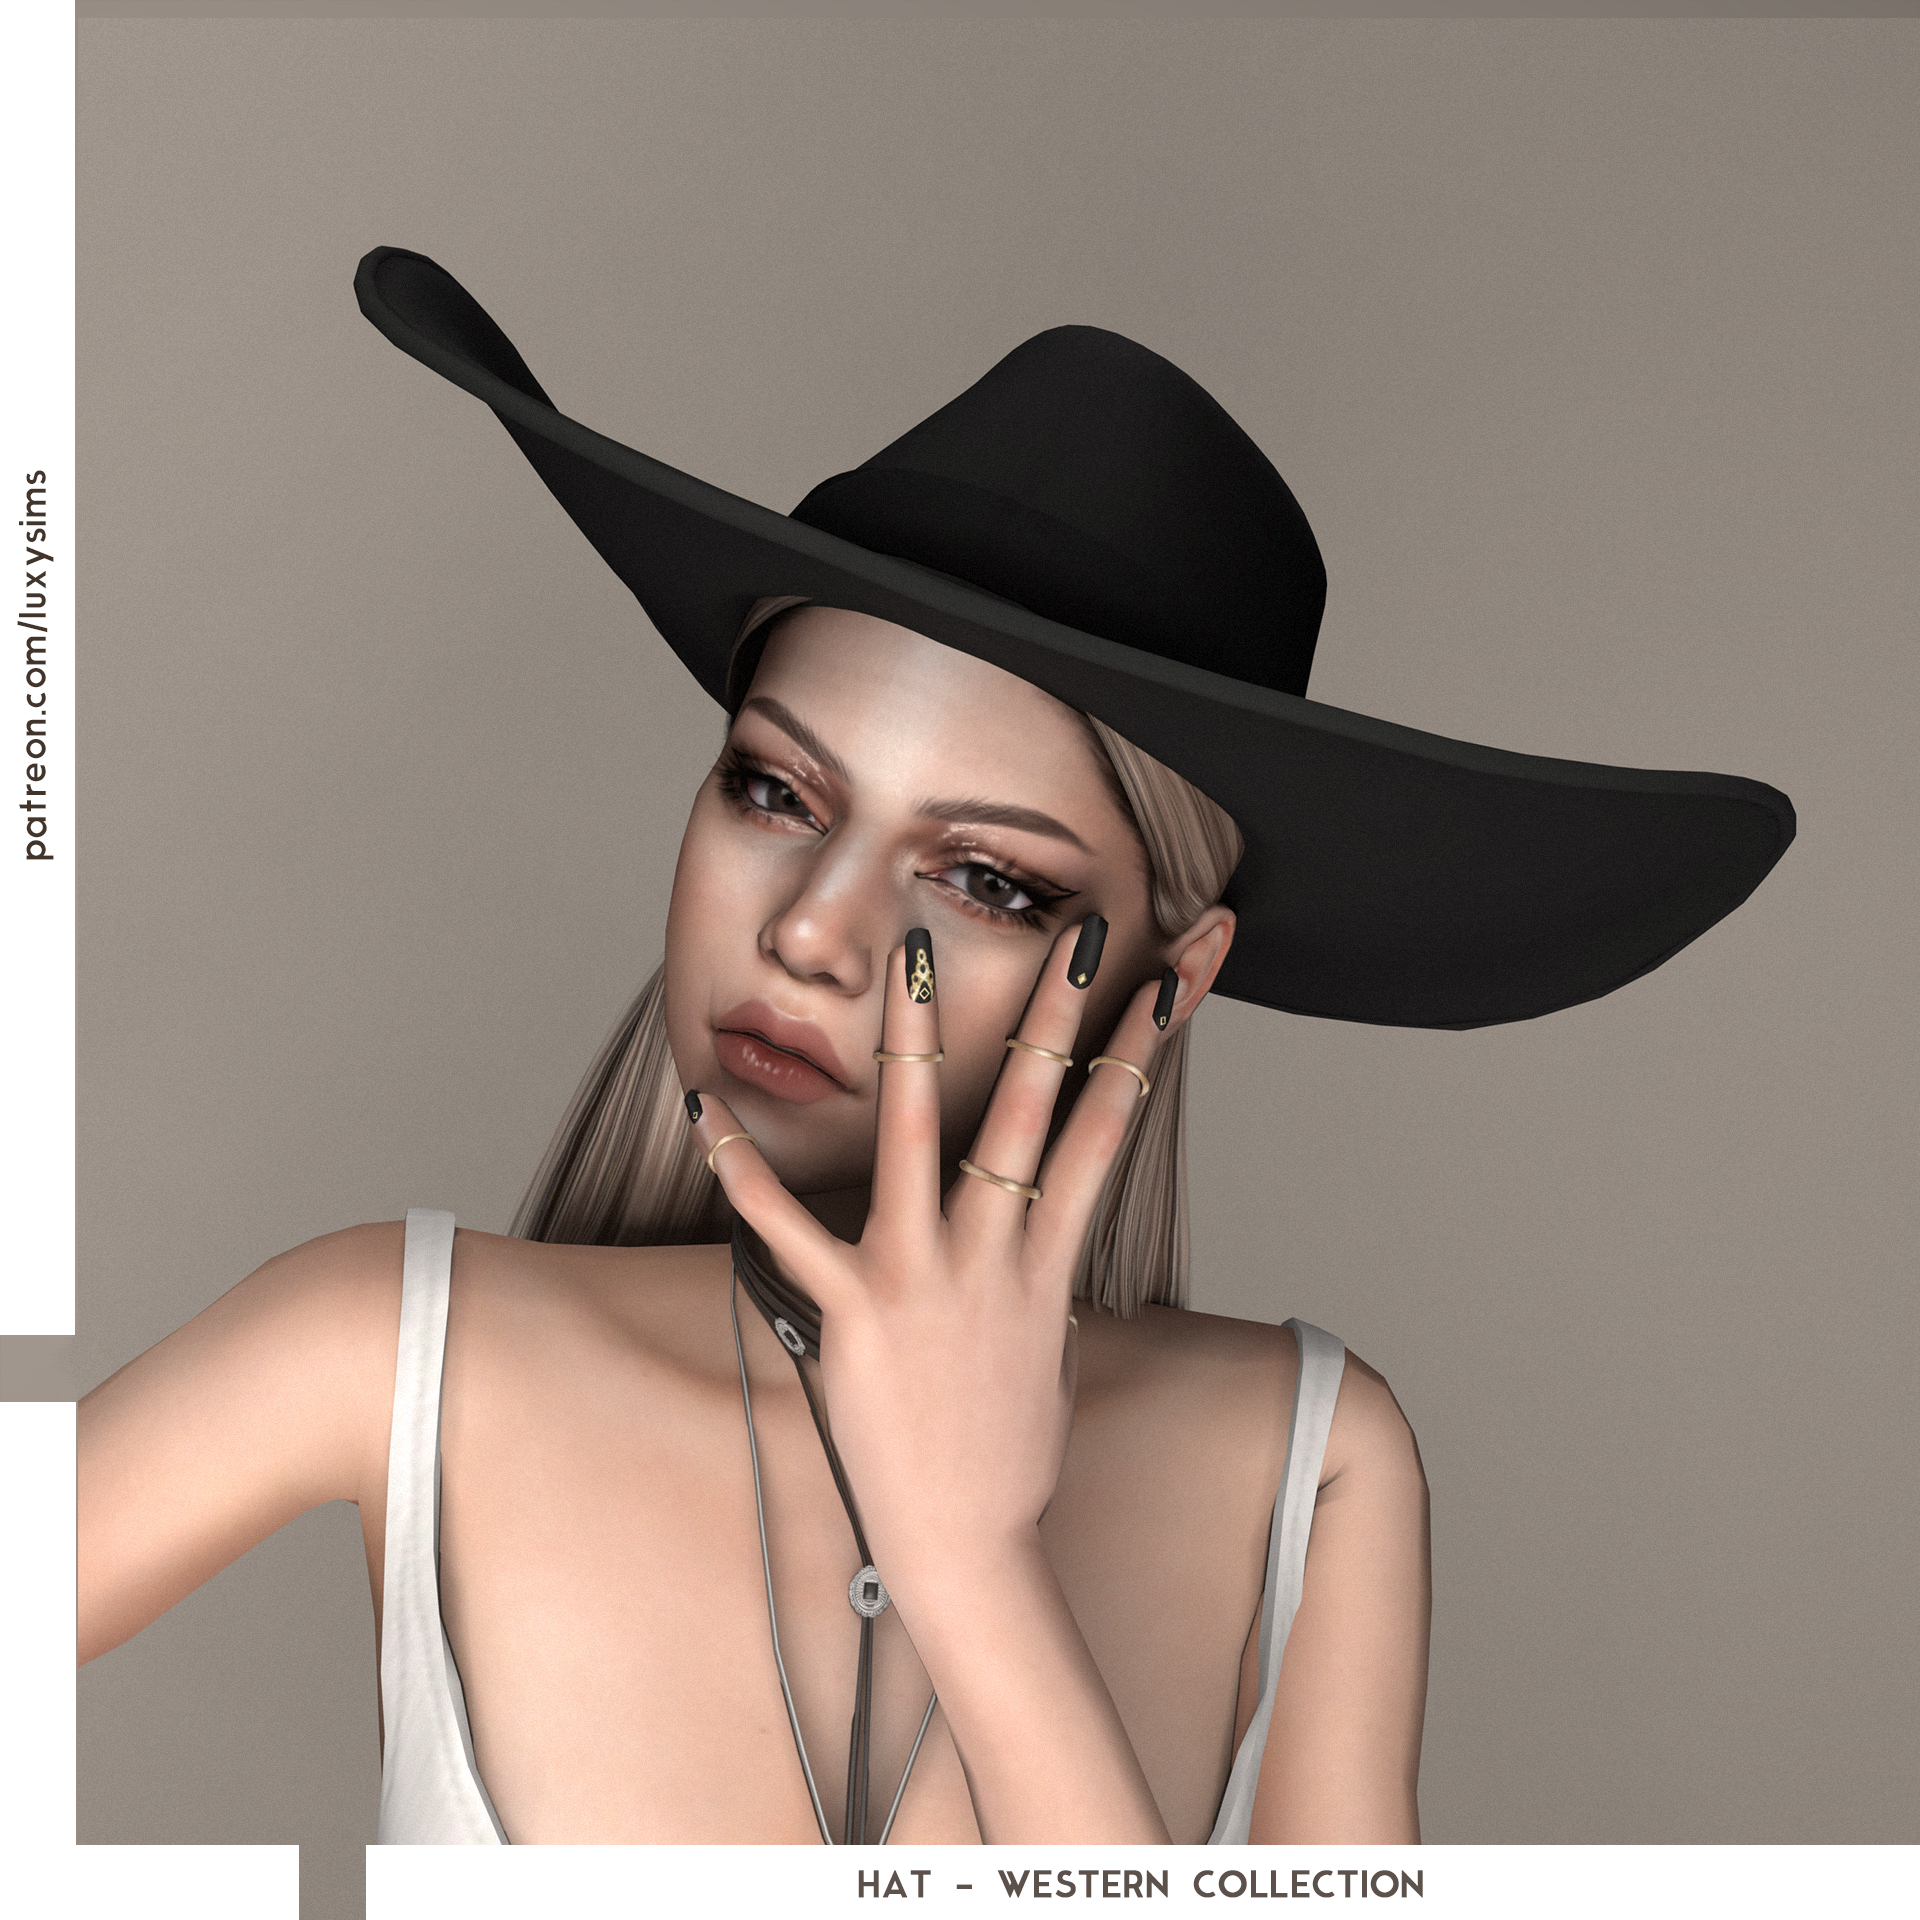 Hat - Western Collection - The Sims 4 Create a Sim - CurseForge